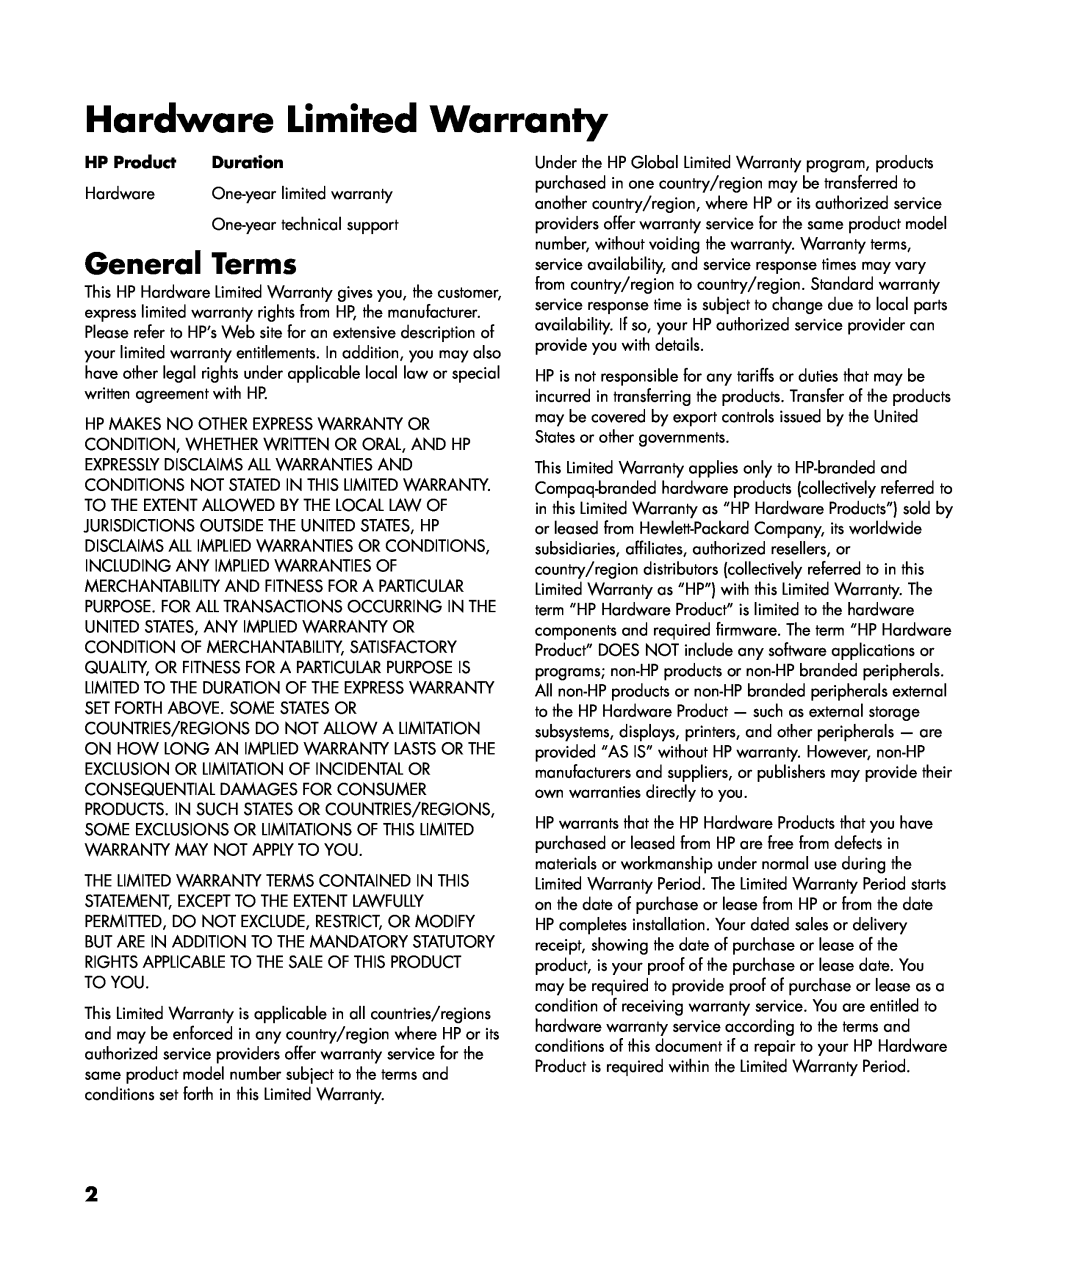 HP a1719n, a1700n, a1767c, a1720n, a1748x, a1744x, a1742n, a1740n Hardware Limited Warranty, General Terms, HP Product, Duration 